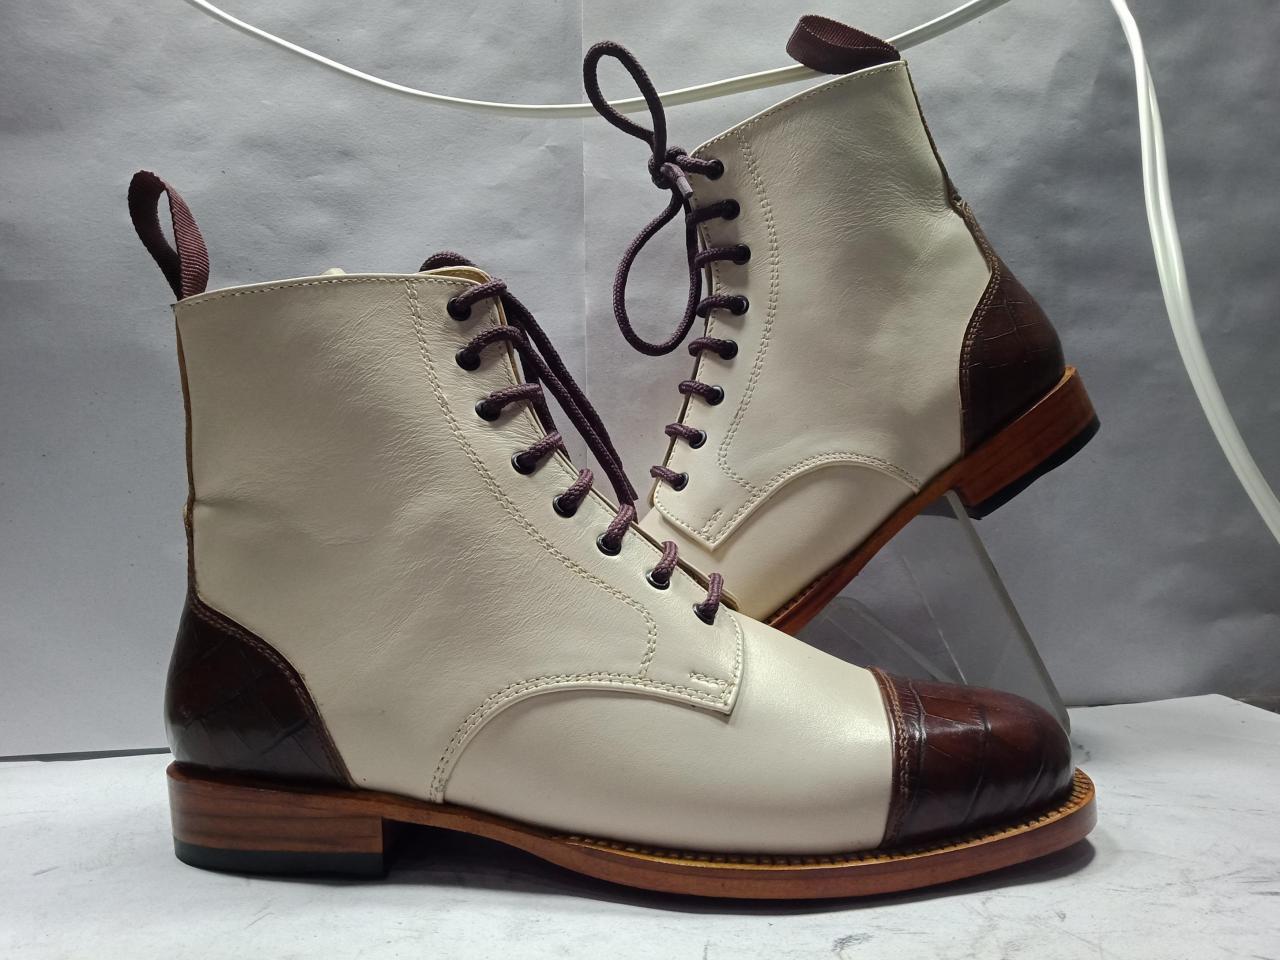 Handmade Men's Ankle High Brown White Boots, Men Cap Toe Leather Lace Up Boots